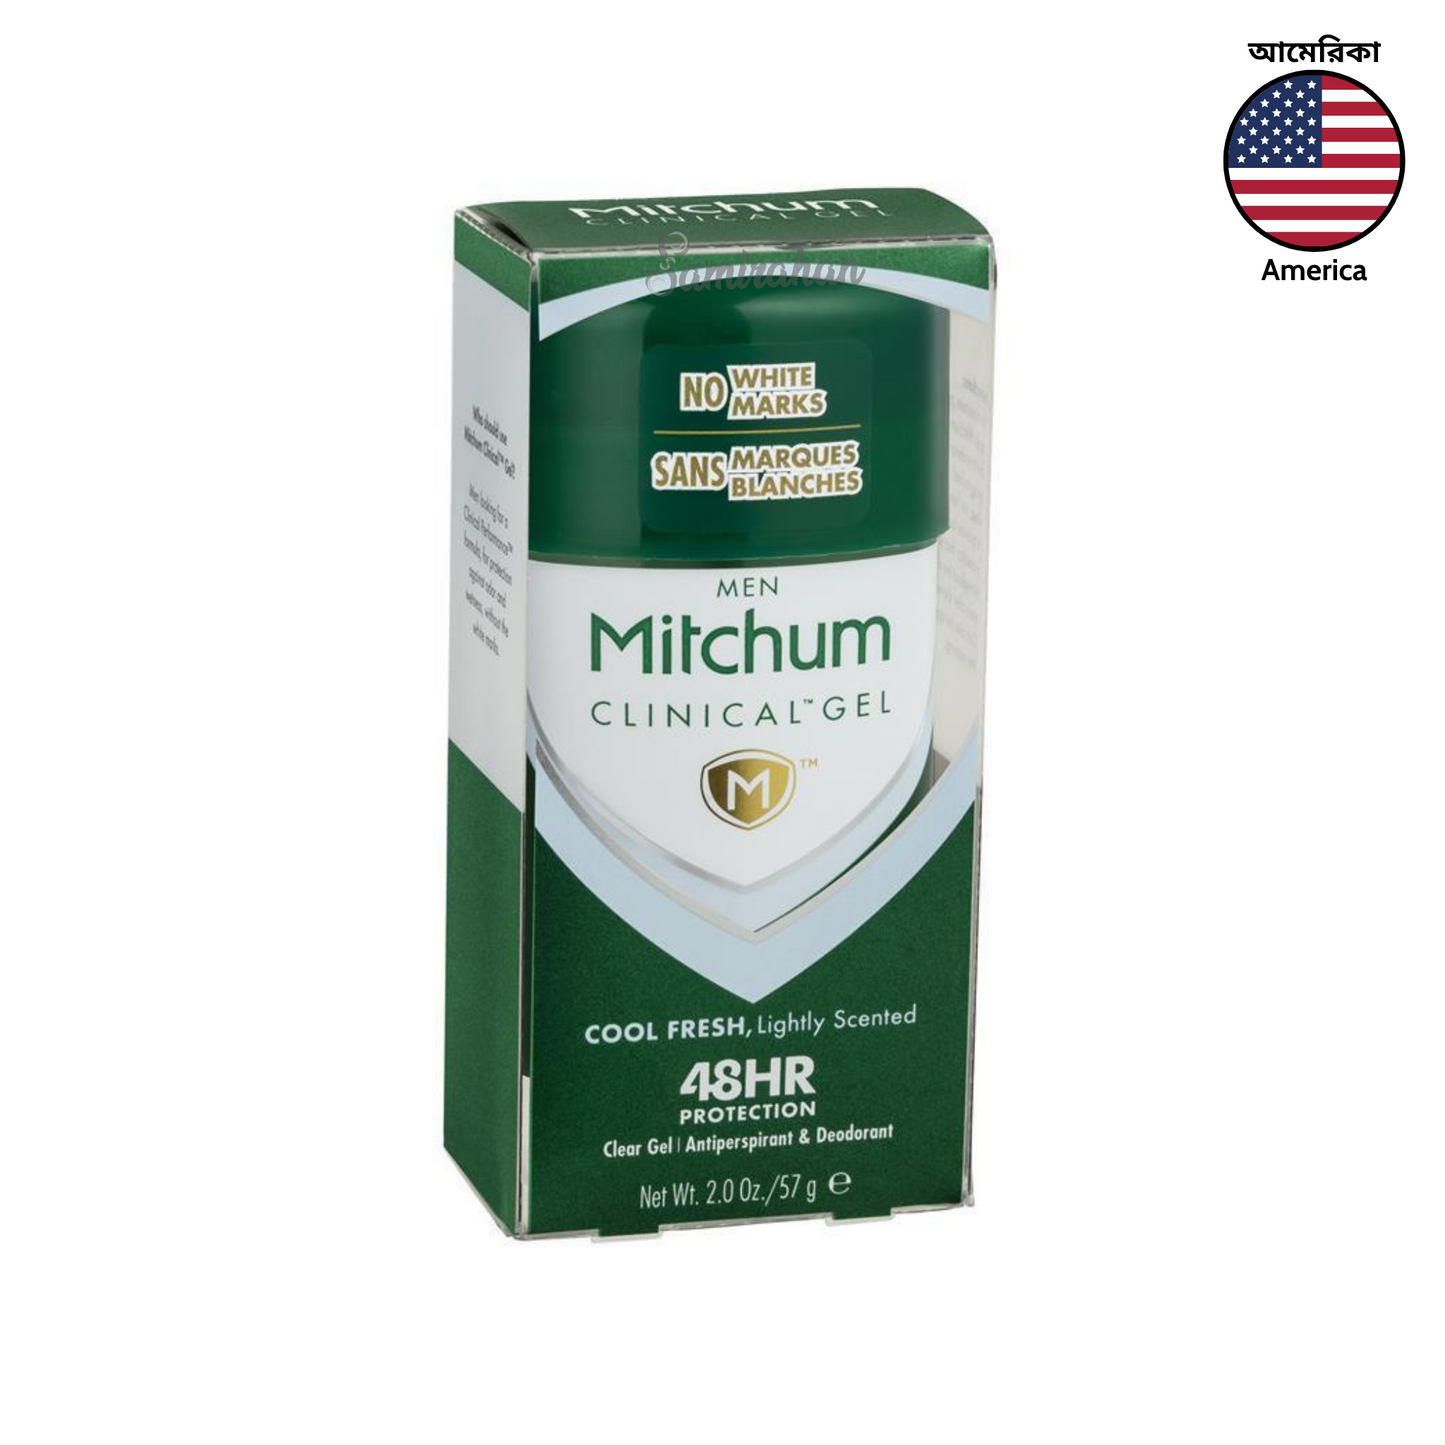 Mitchum For Men Clinical Gel Deodorant provides reliable protection from sweat & odor, keeping you dry & comfortable up to 48 hours. Best imported foreign authentic genuine real original Australian American USA premium brand quality luxury men's male bf boyfriend husband gift idea price in Dhaka Chittagong Bangladesh.